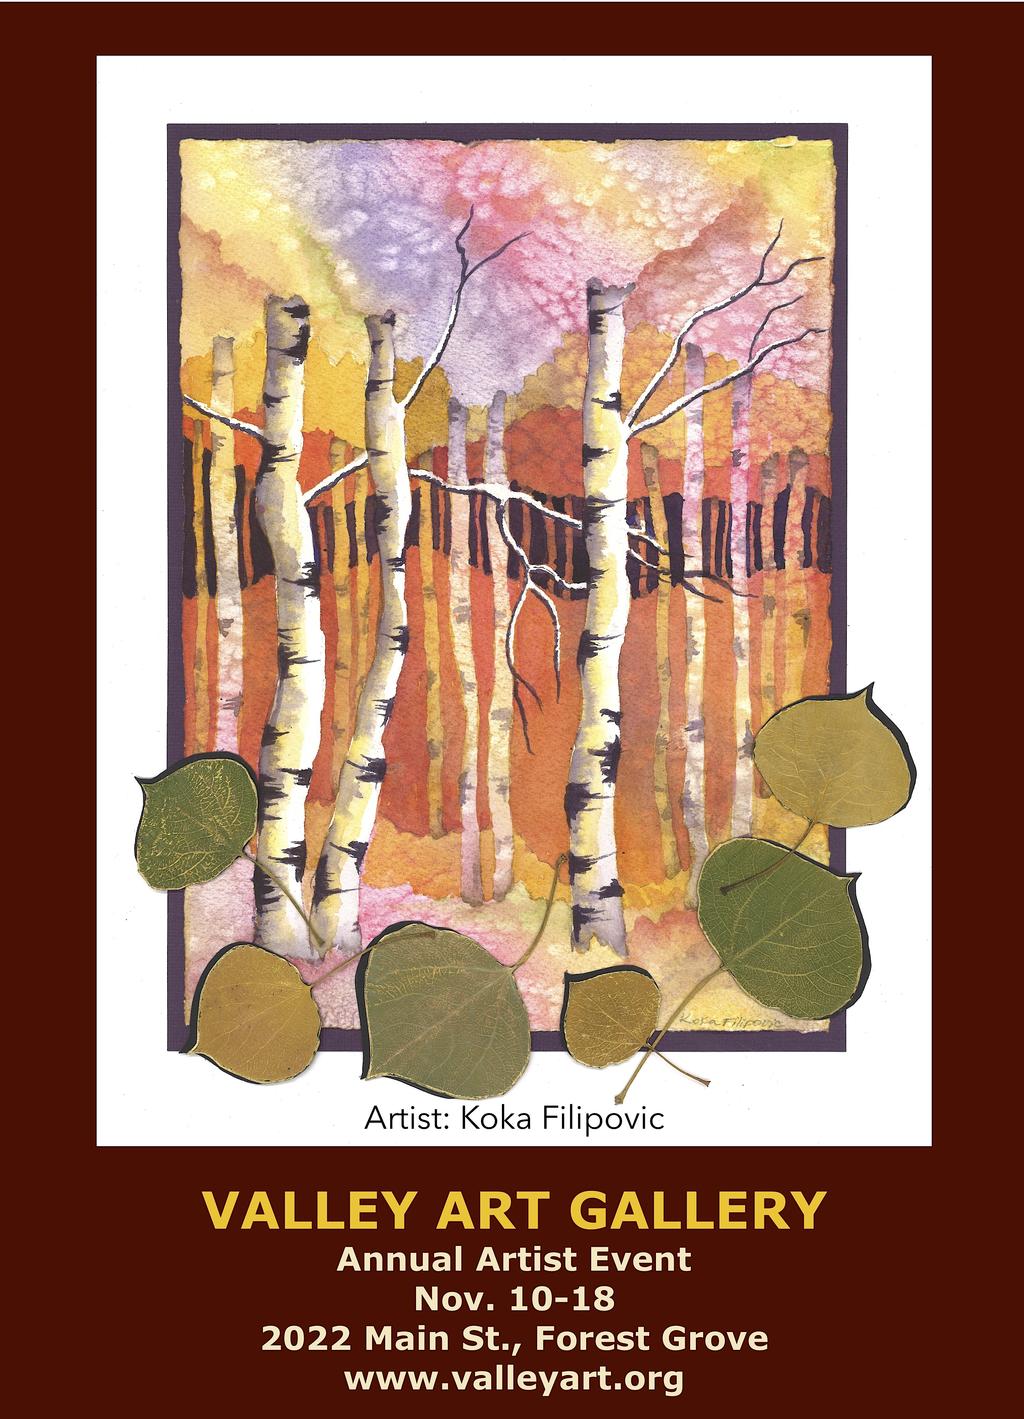 Teachings of Michael November - 2018 ANNUAL ARTIST EVENT Join us for an intimate and uplifting presentation of fine art from a variety of local artists.